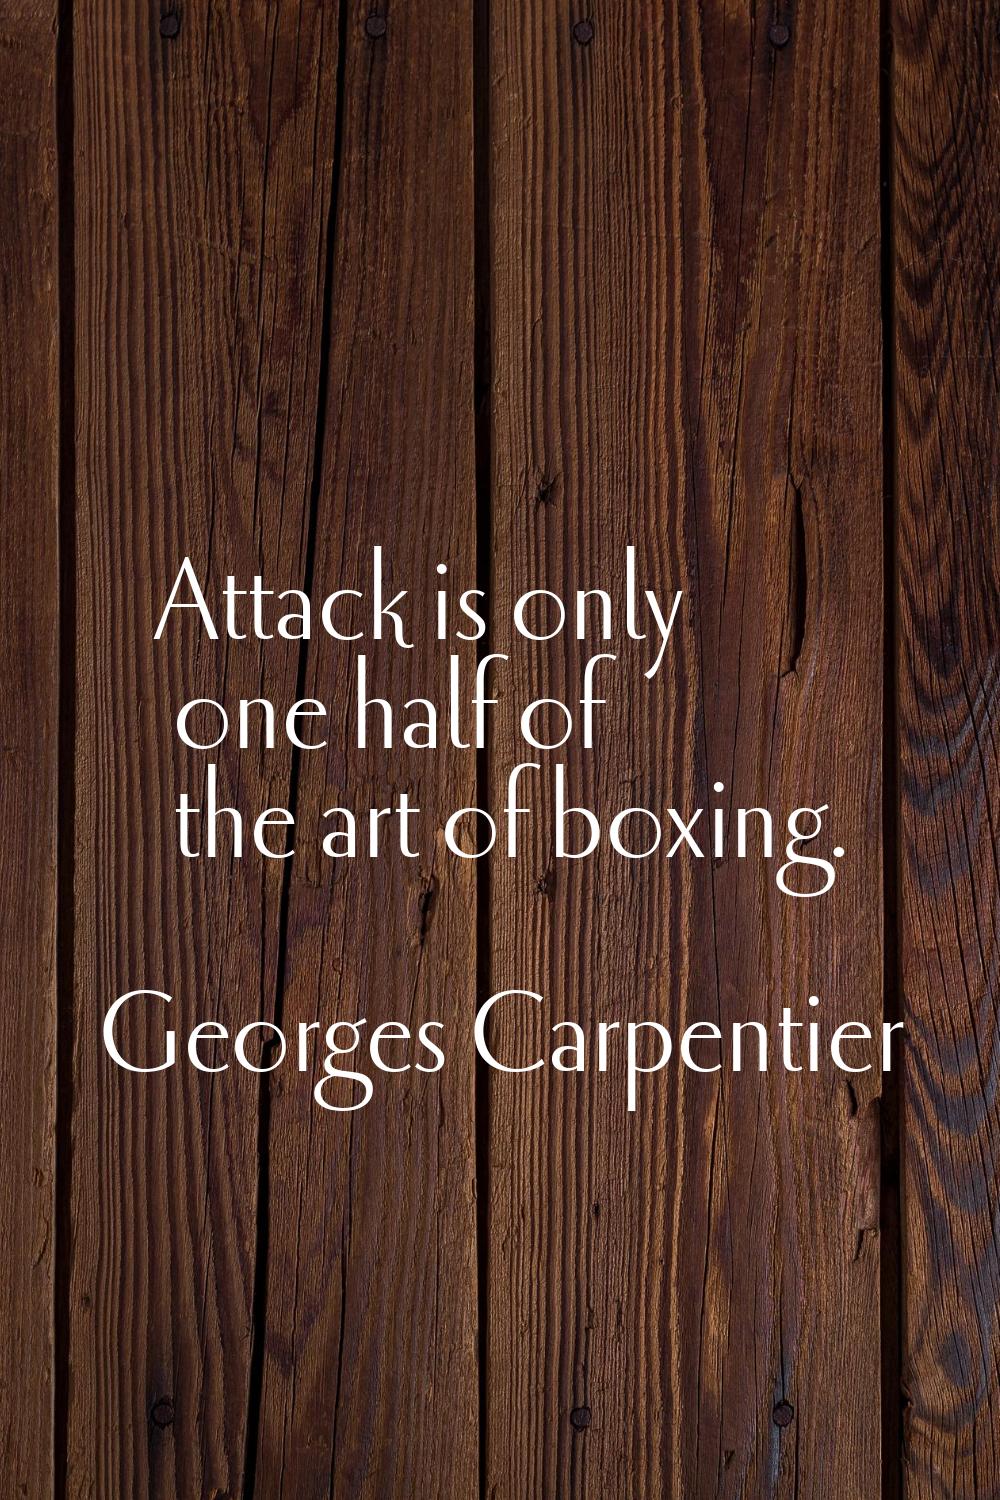 Attack is only one half of the art of boxing.